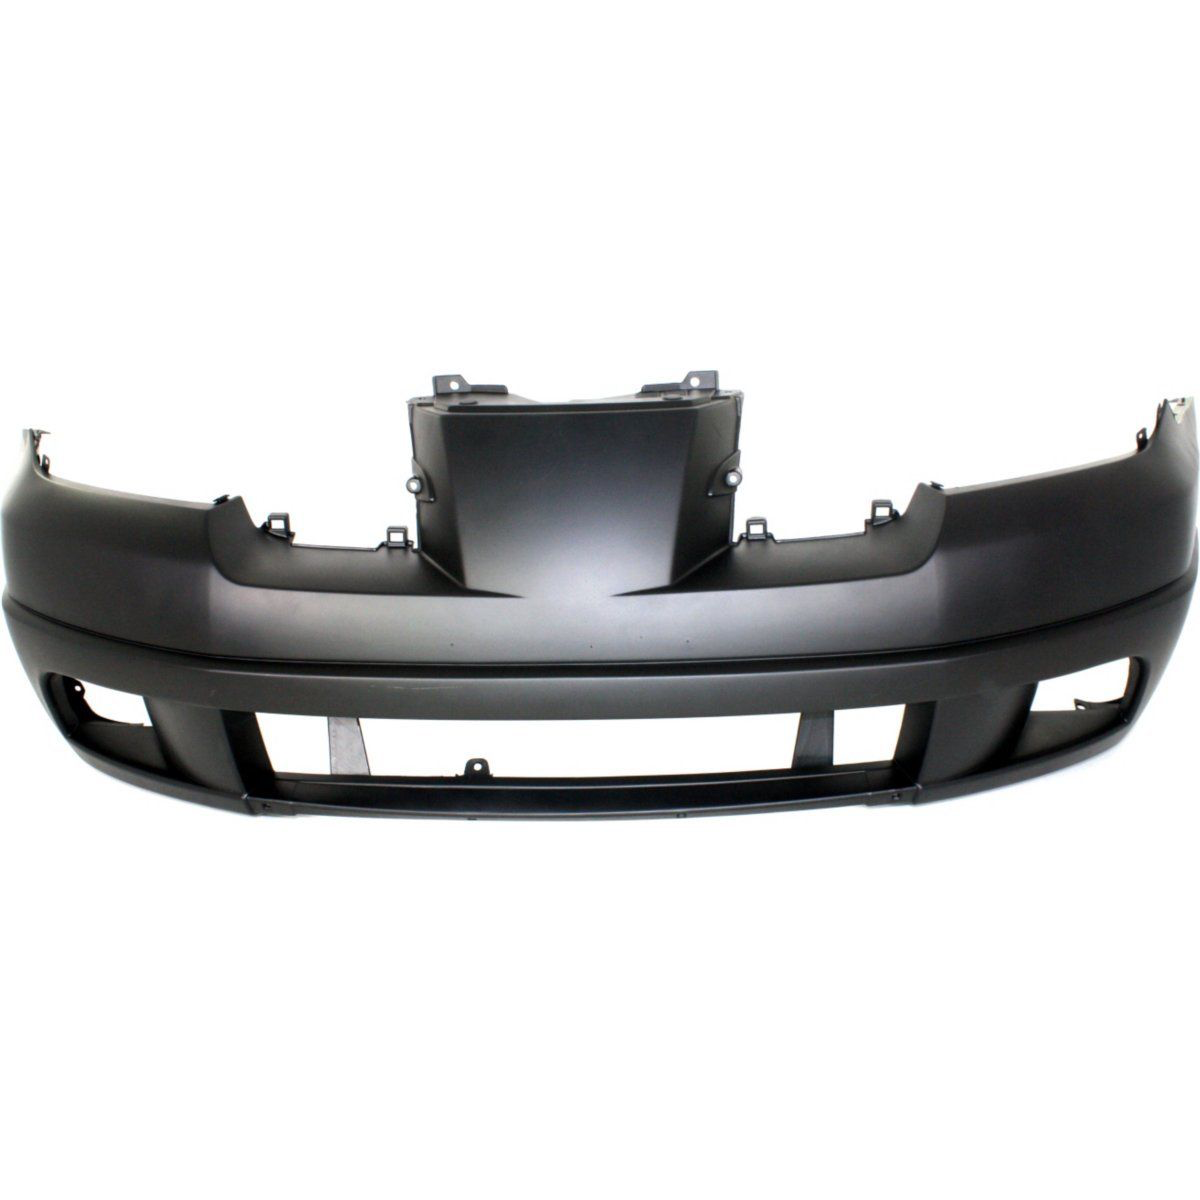 2003-2003 MITSUBISHI OUTLANDER Front Bumper Cover includes mounting clips & rivets Painted to Match